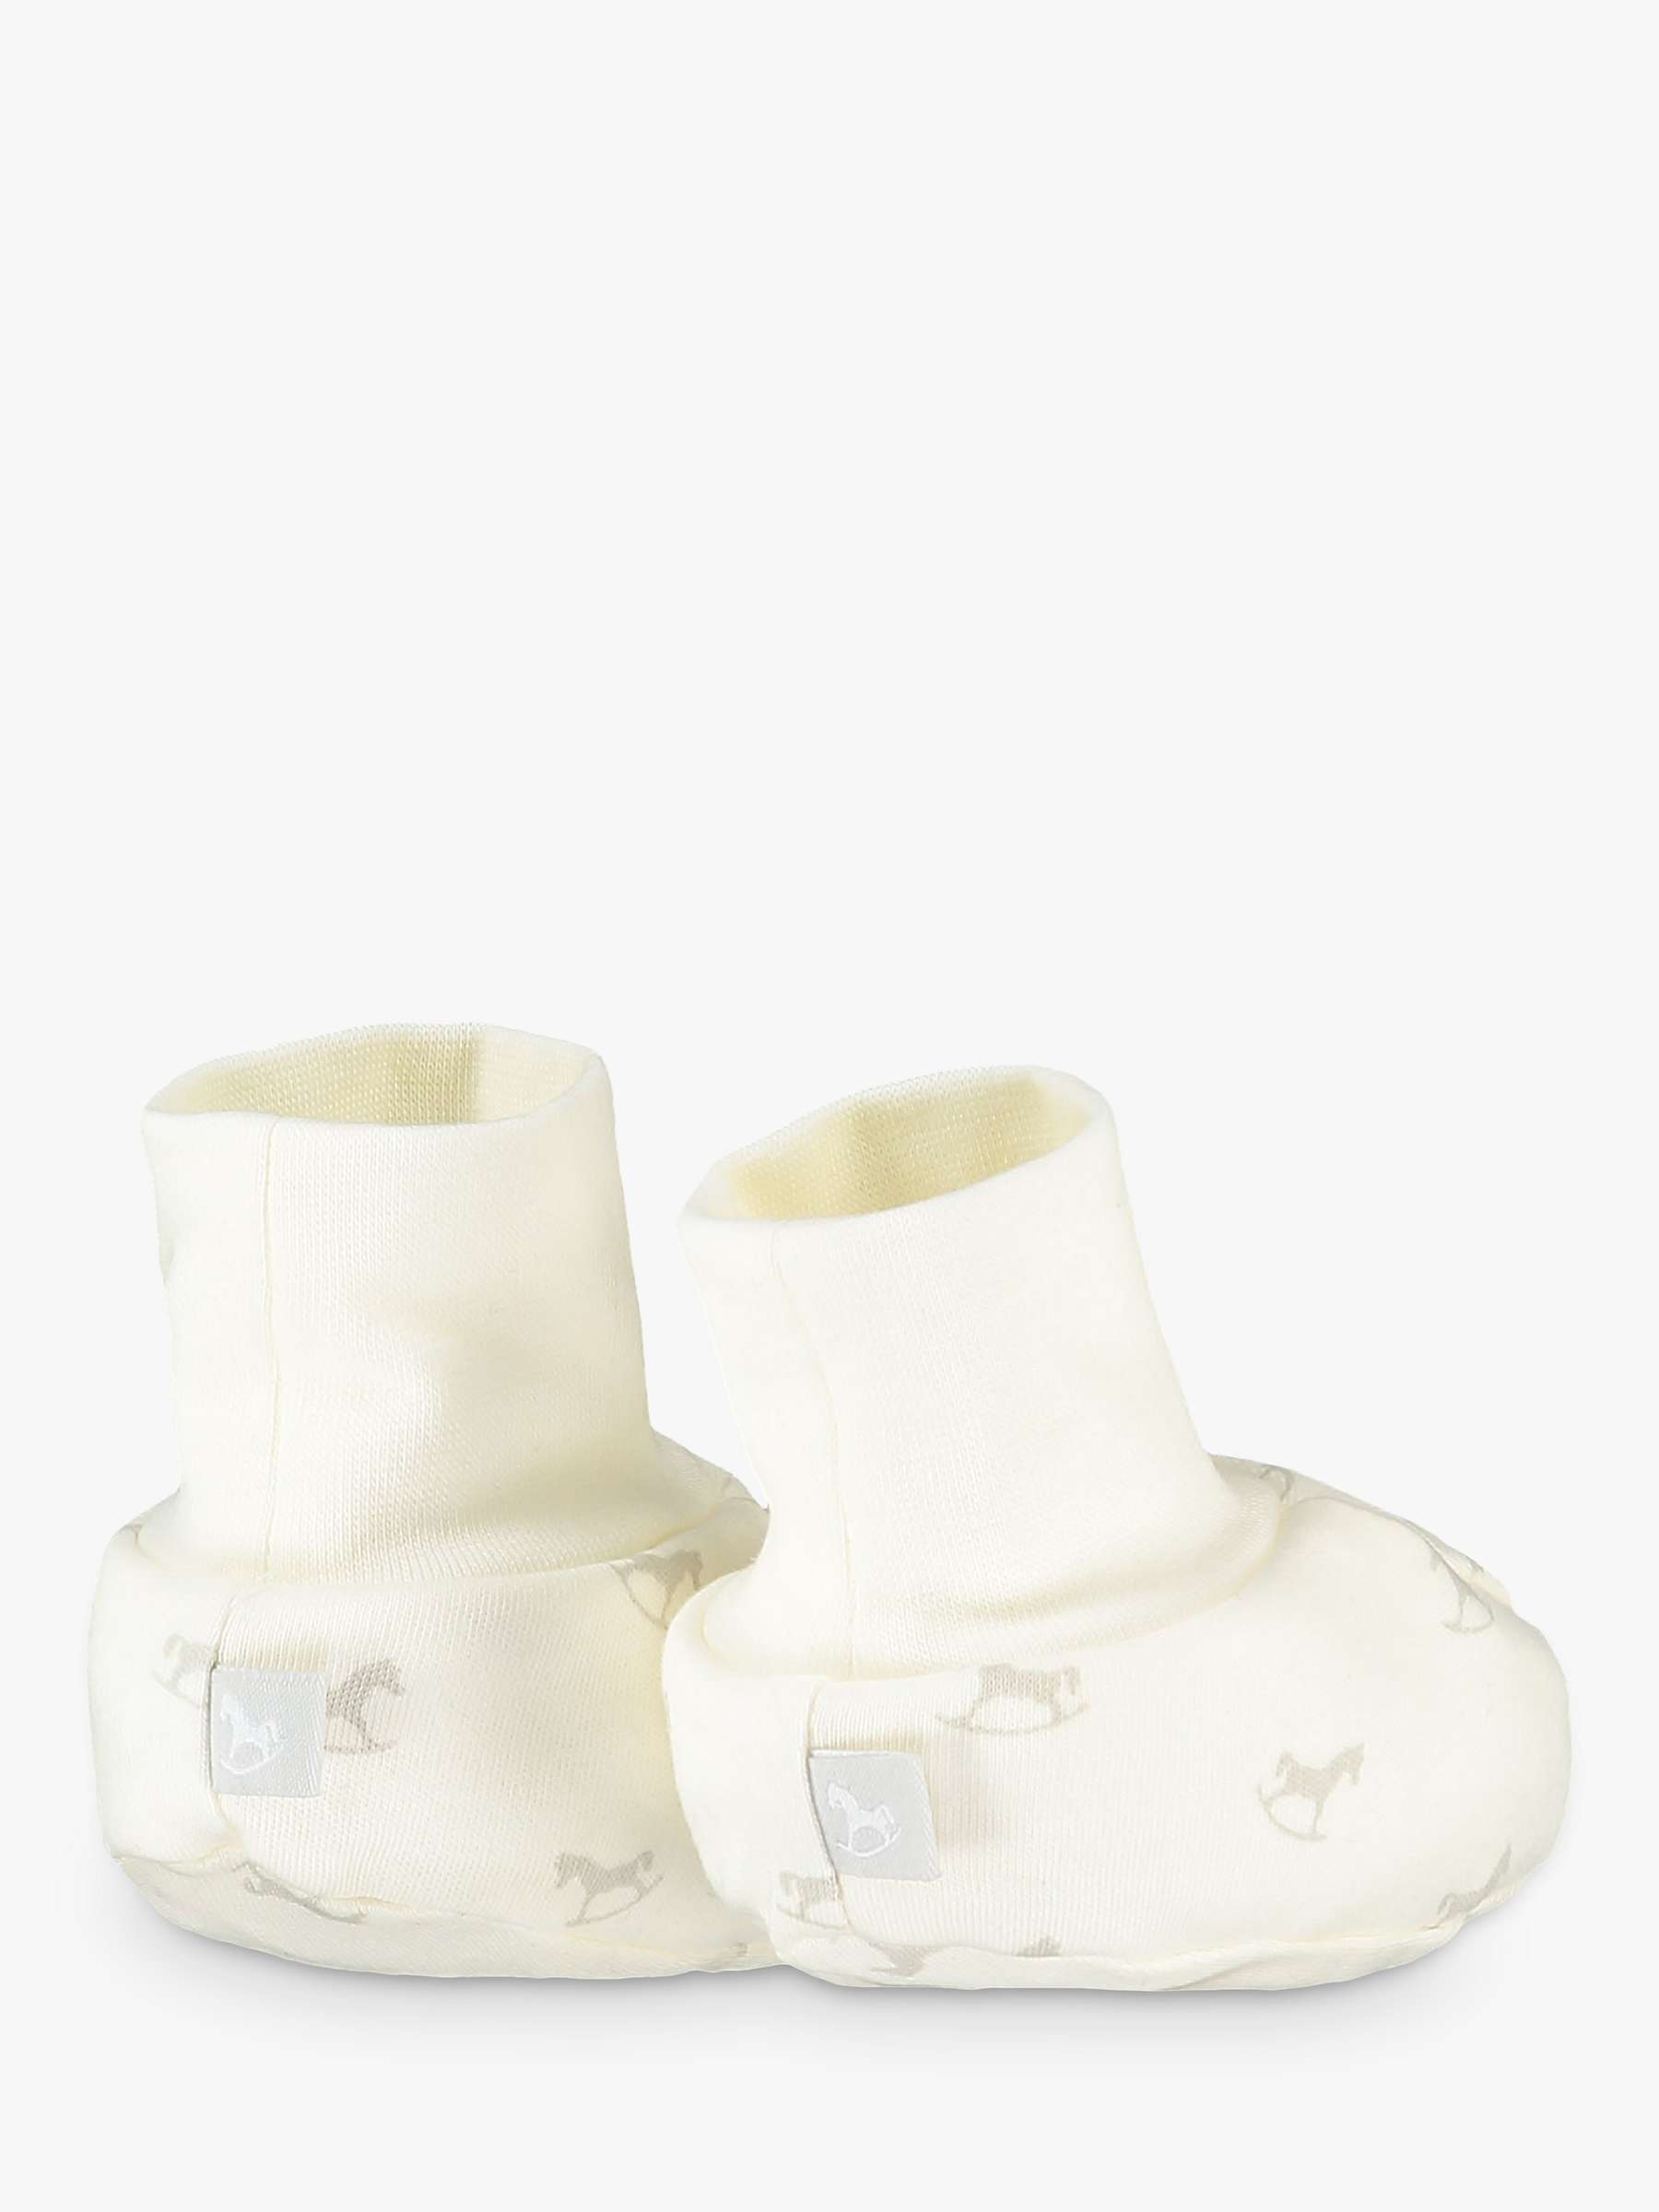 Buy The Little Tailor Baby Stripe & Rocking Horse Booties, Pack of 2 Online at johnlewis.com